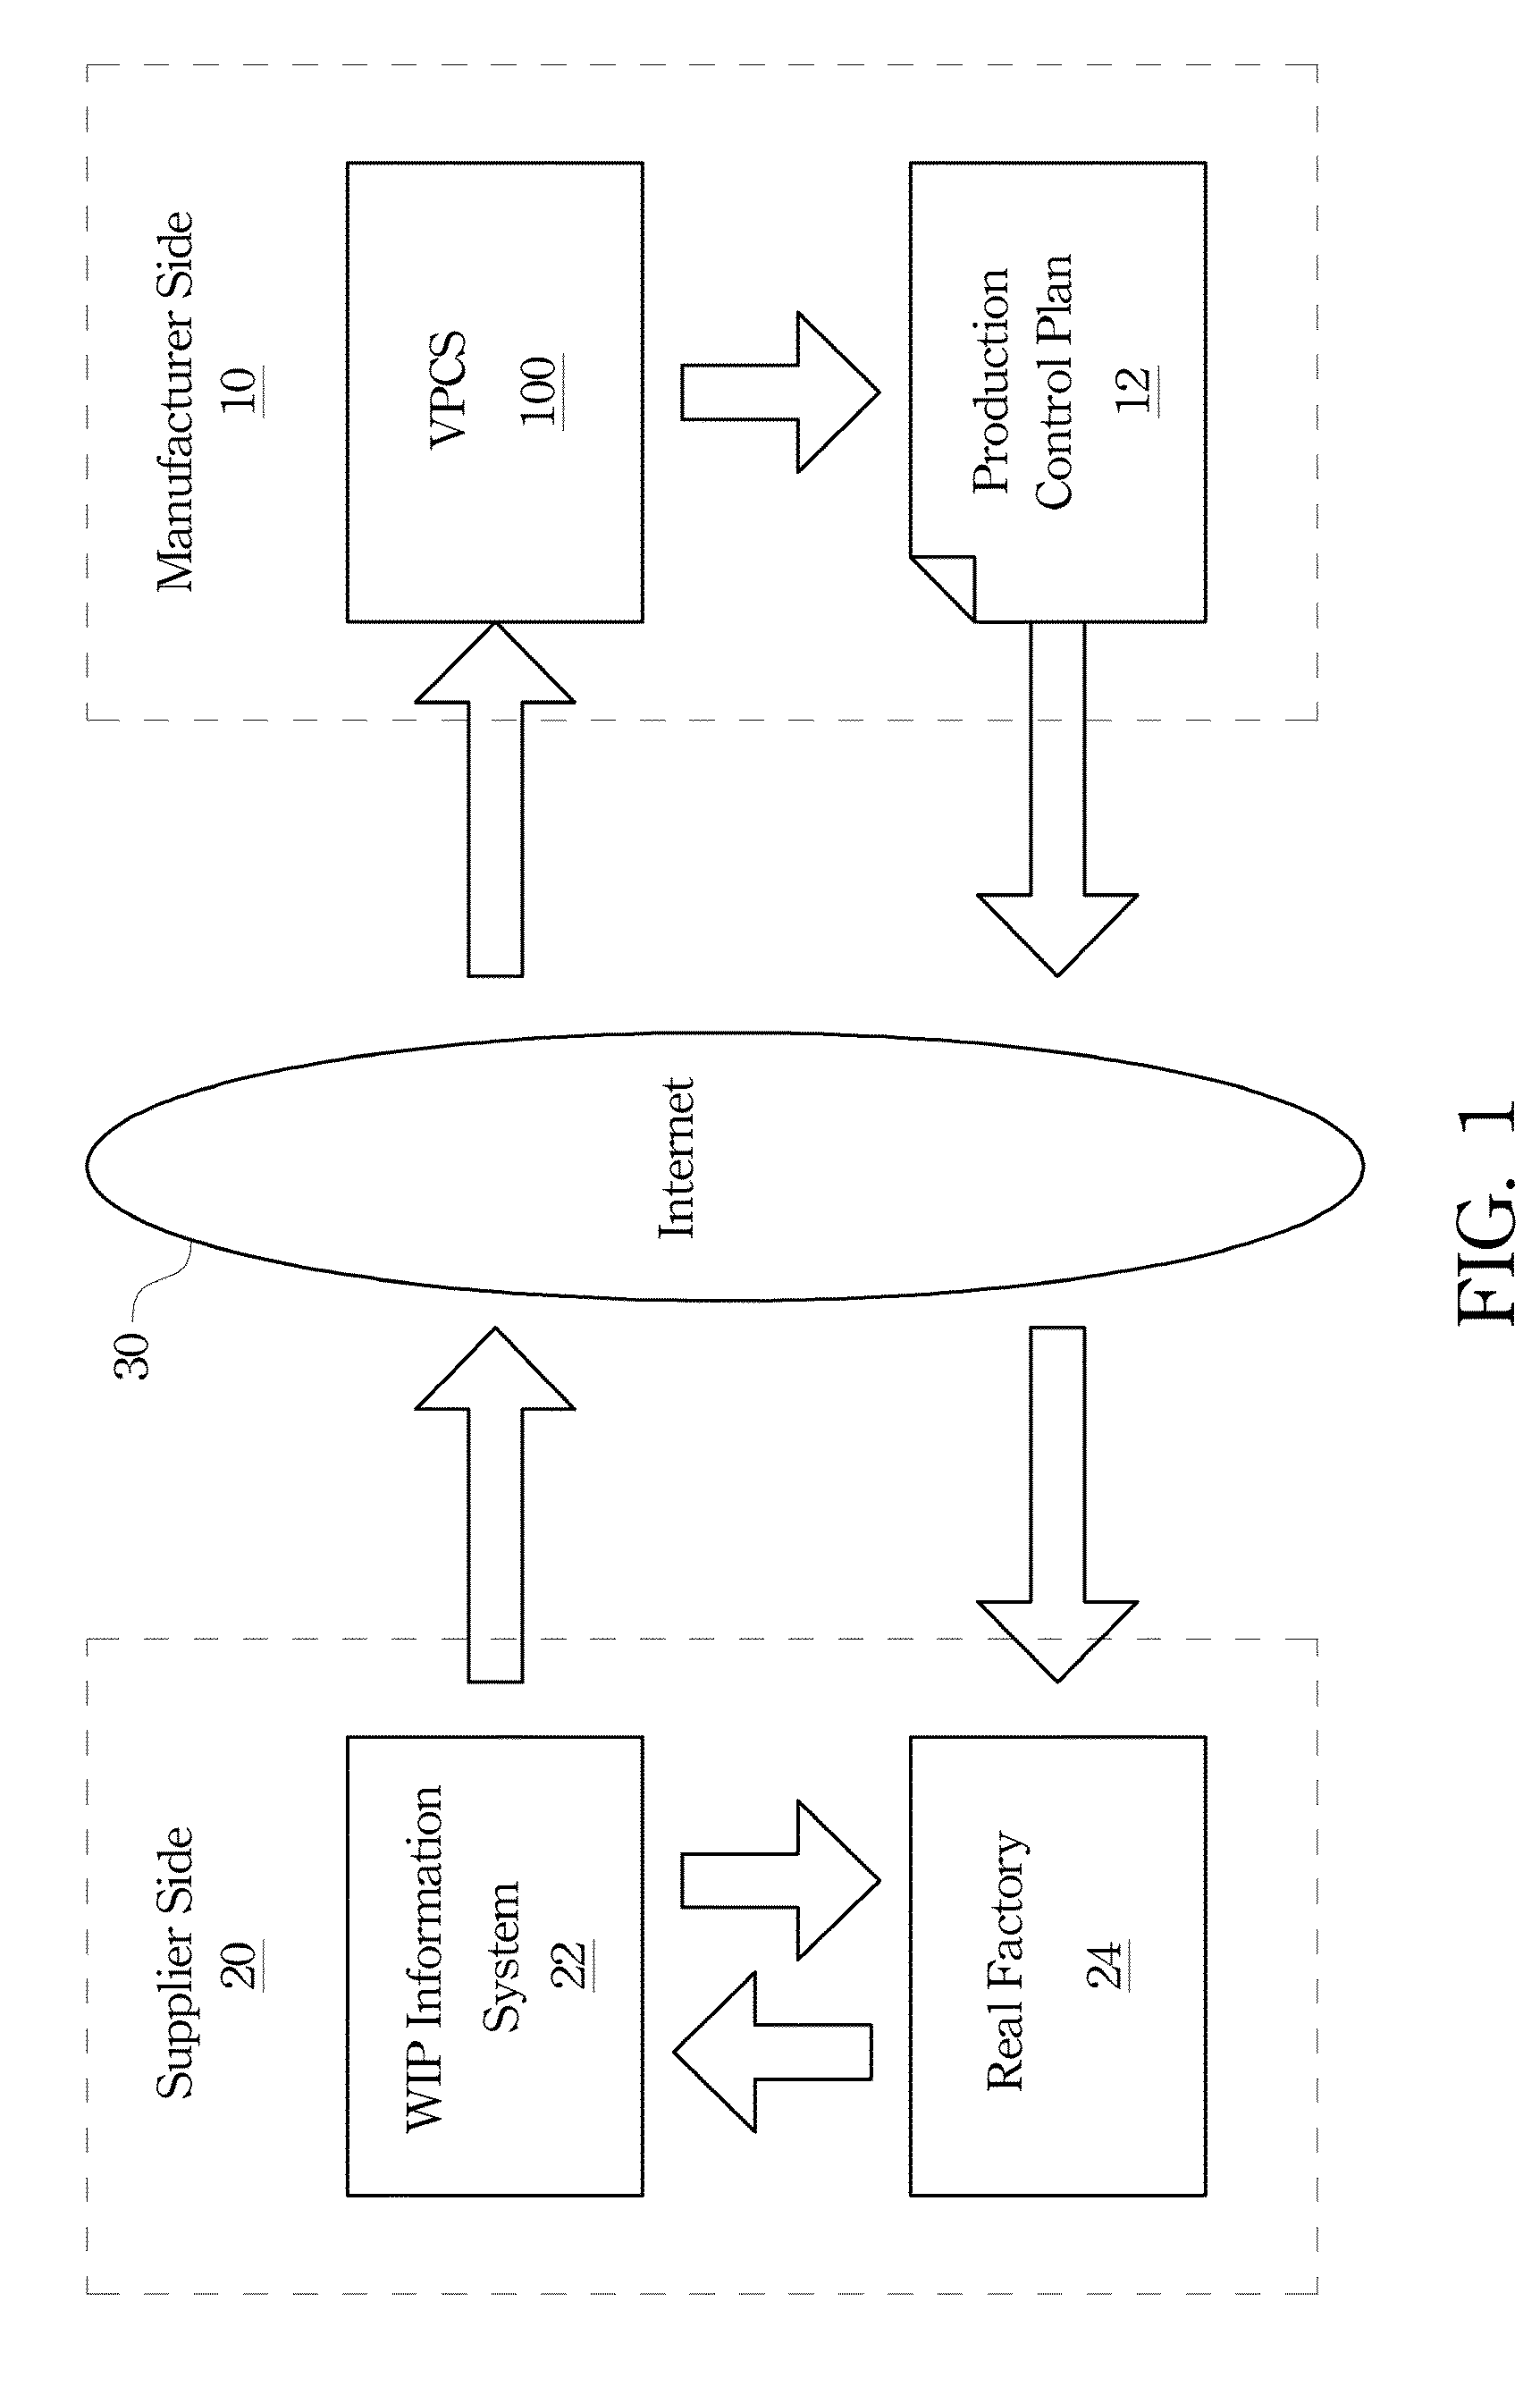 Virtual production control system and method and computer program product thereof